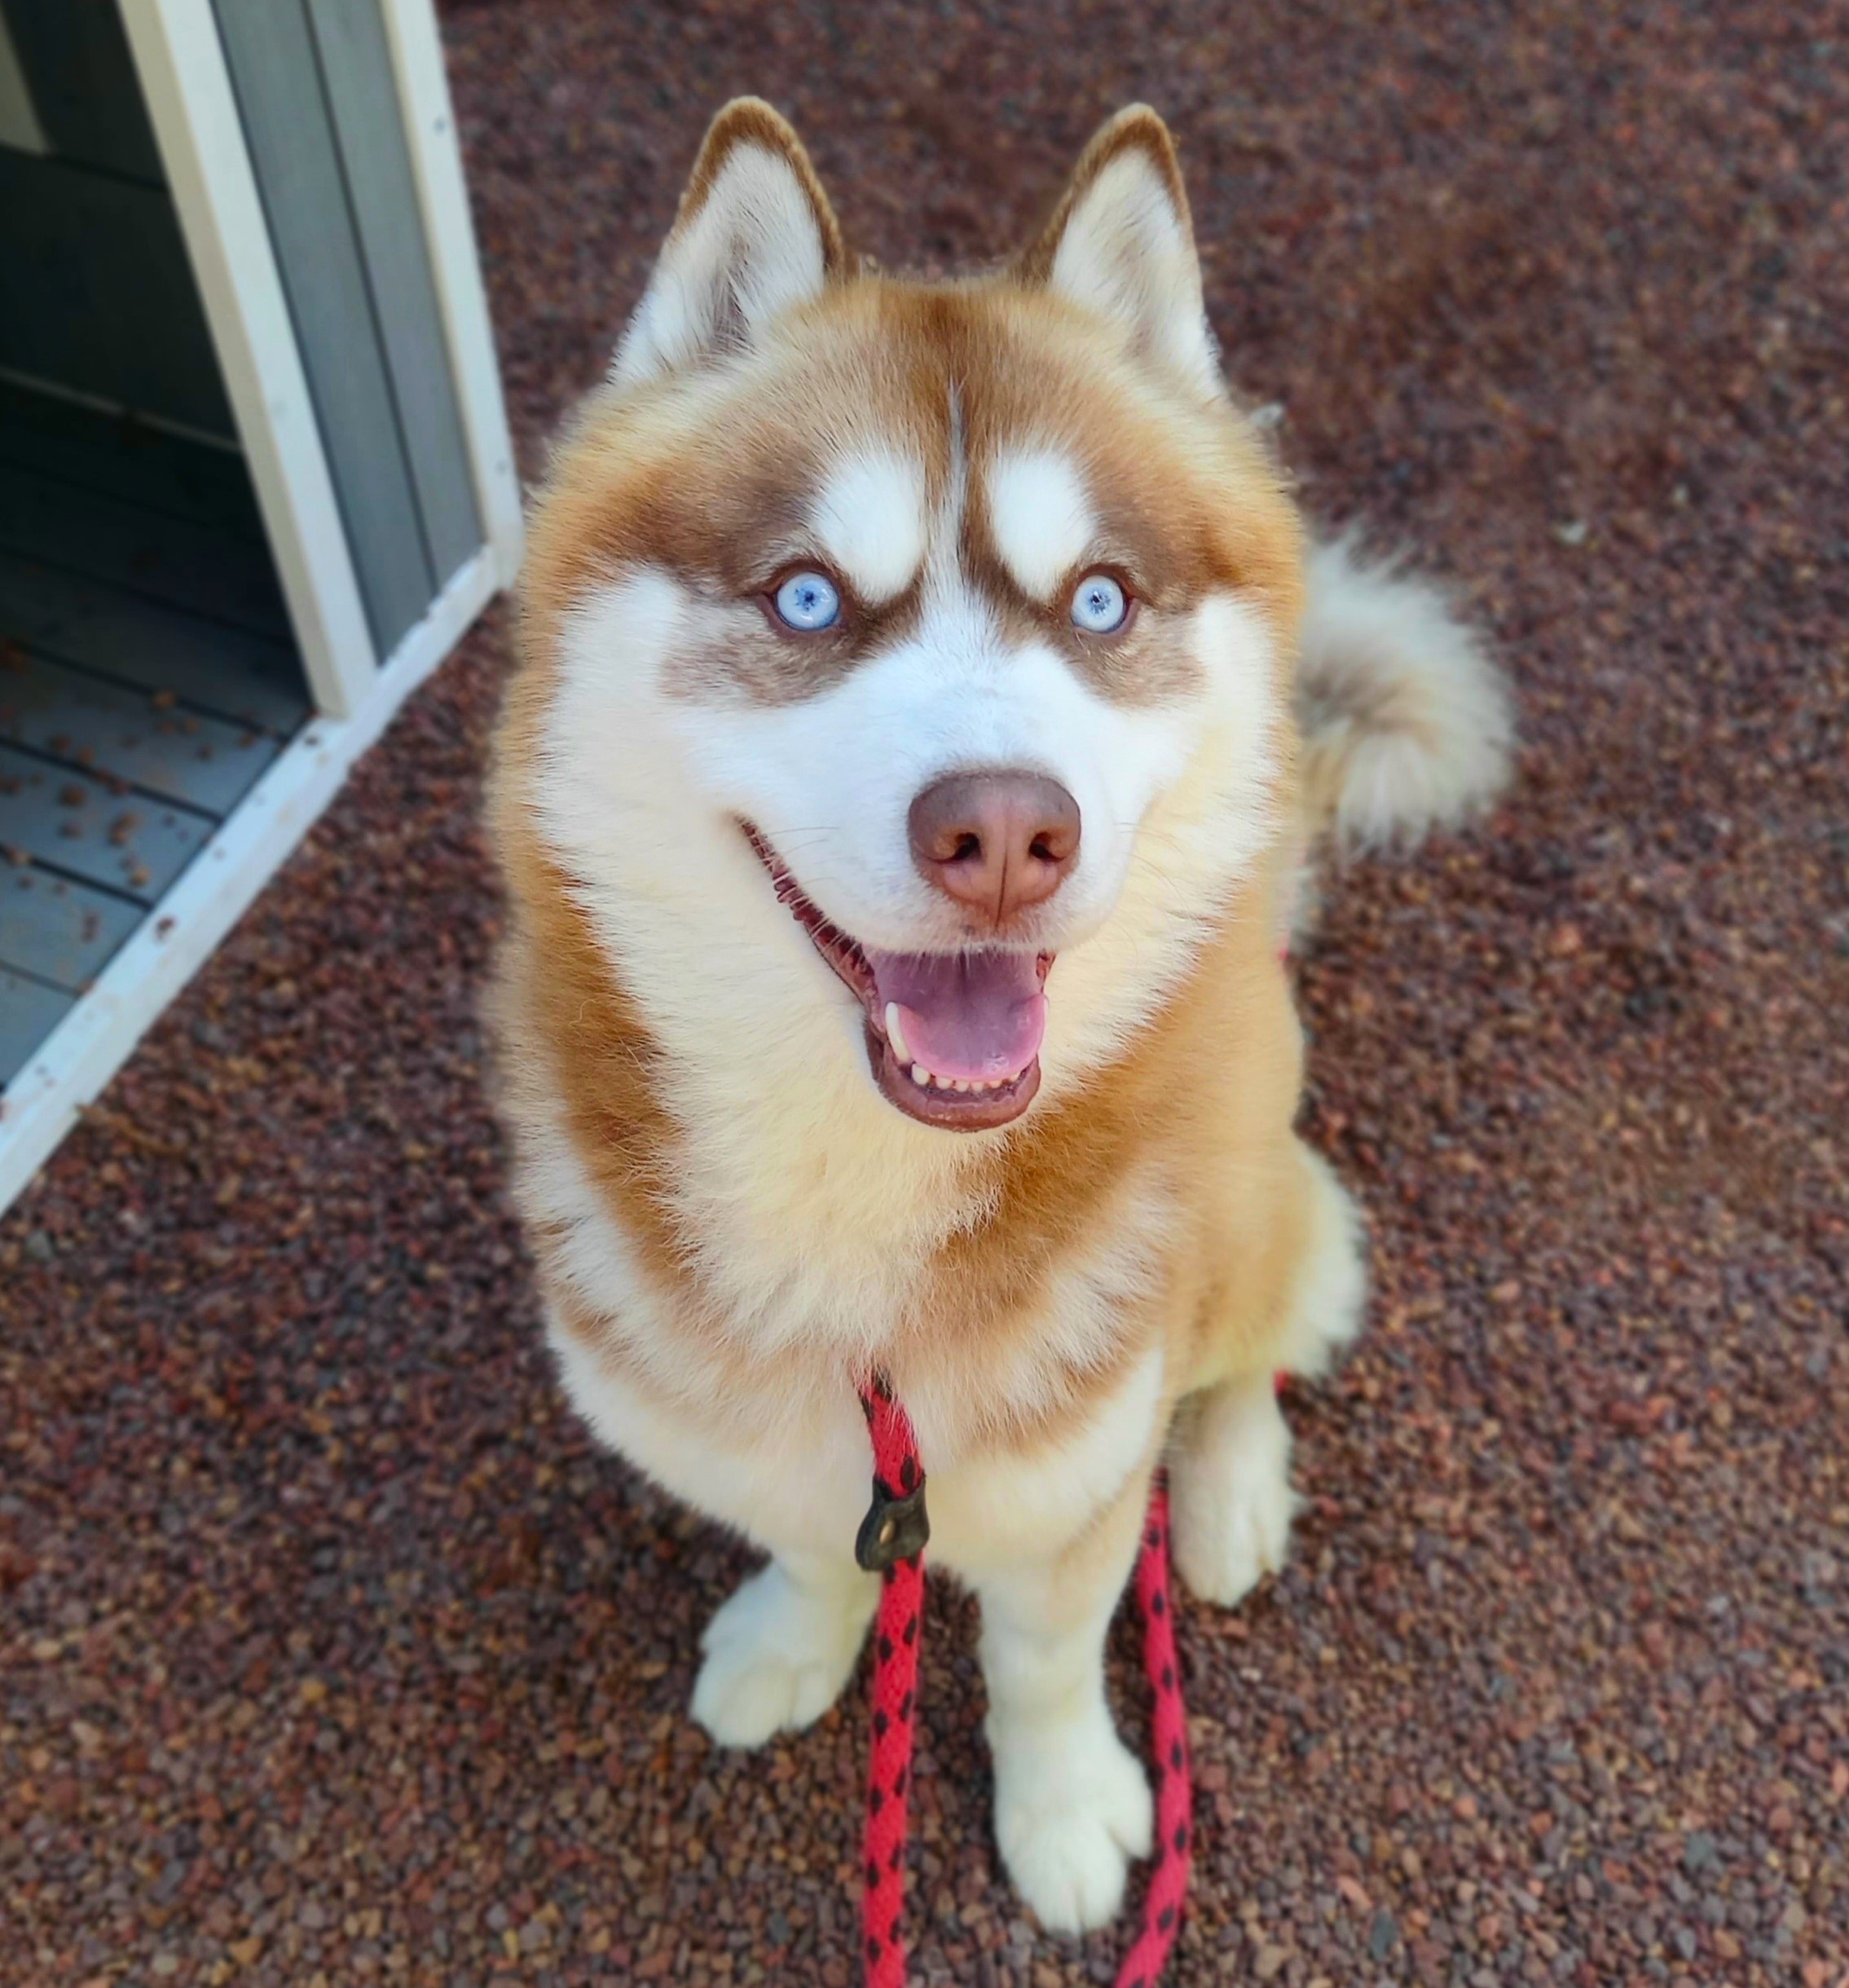 Zlatan is a 2 year old male Husky